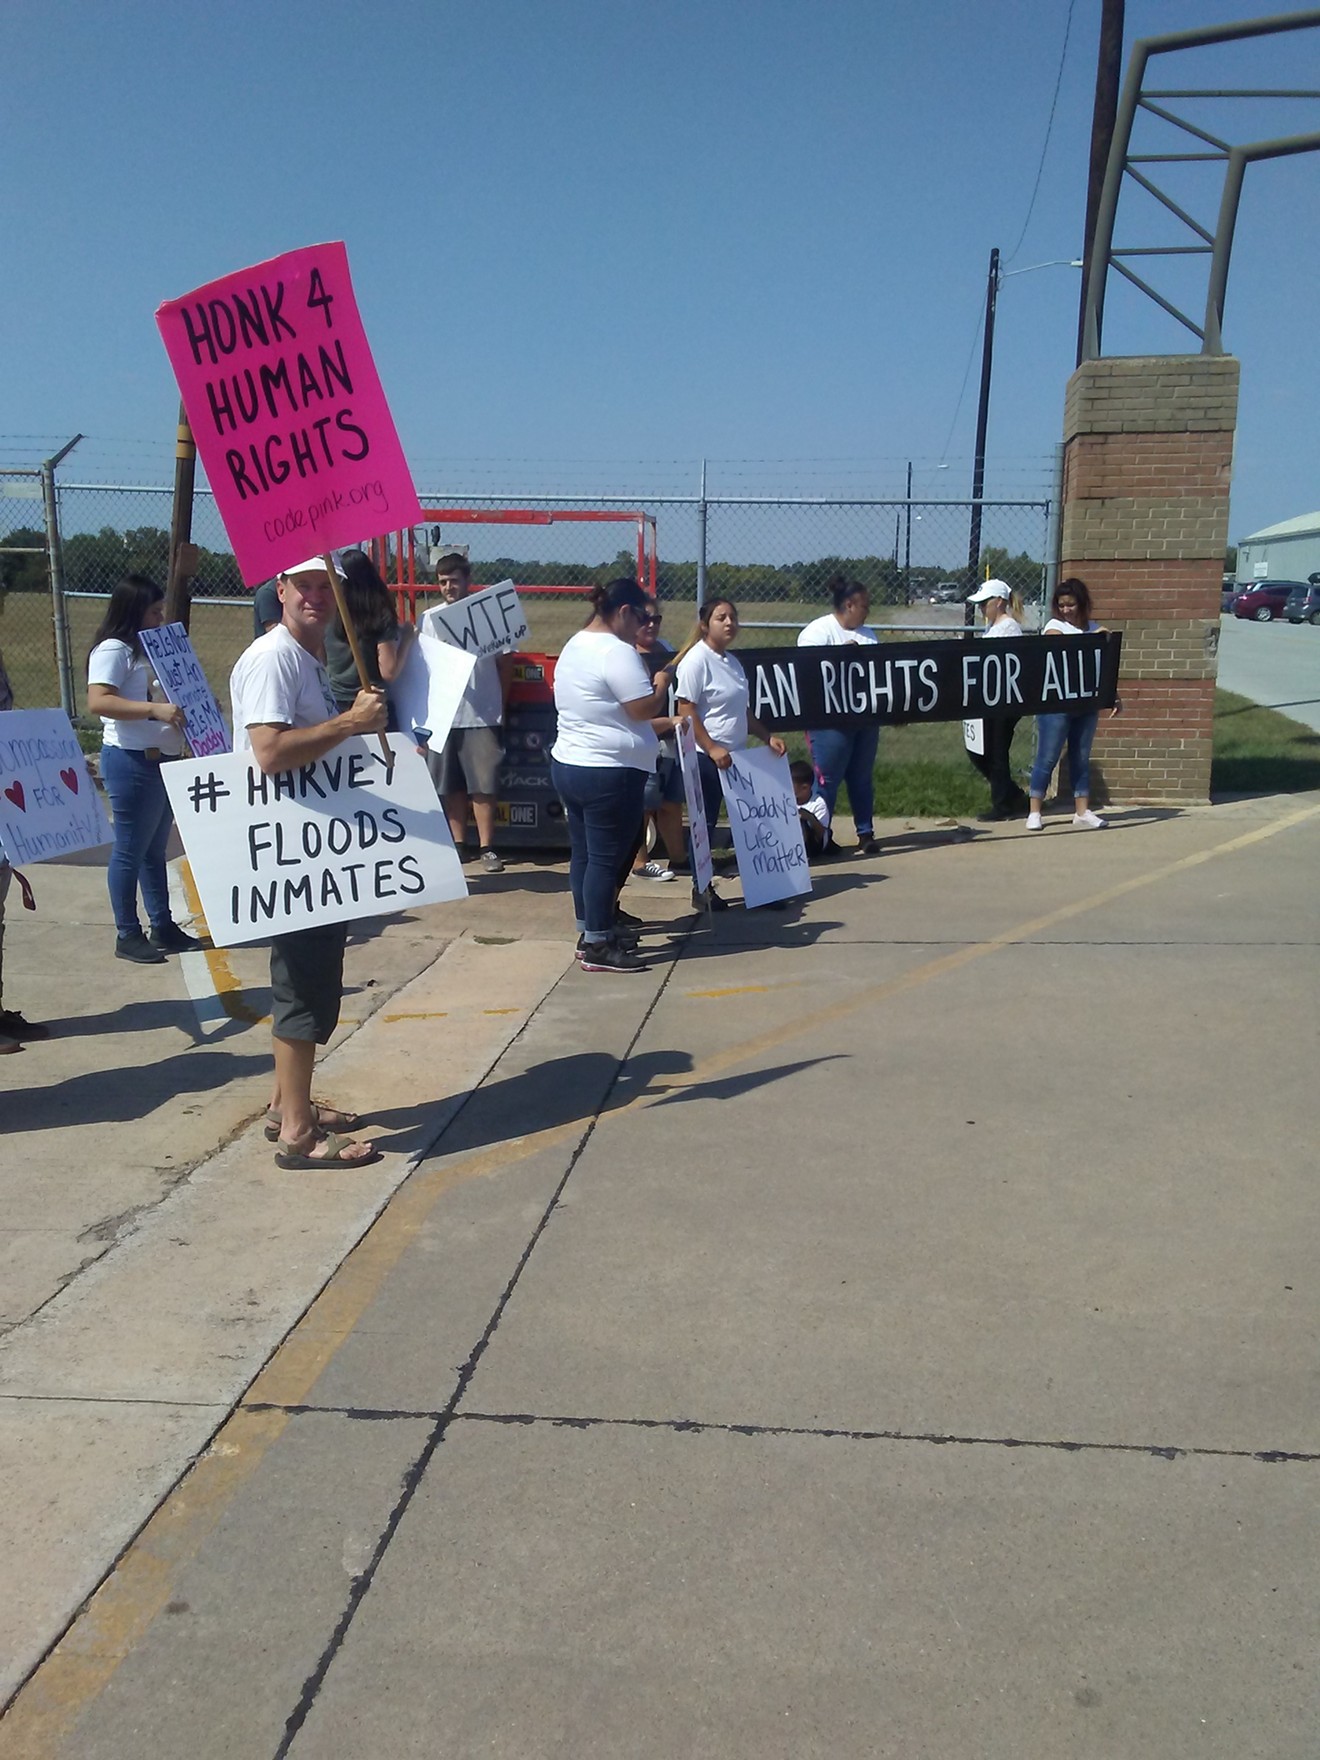 Protesters say the conditions inside the federal prison in Beaumont are unacceptable.